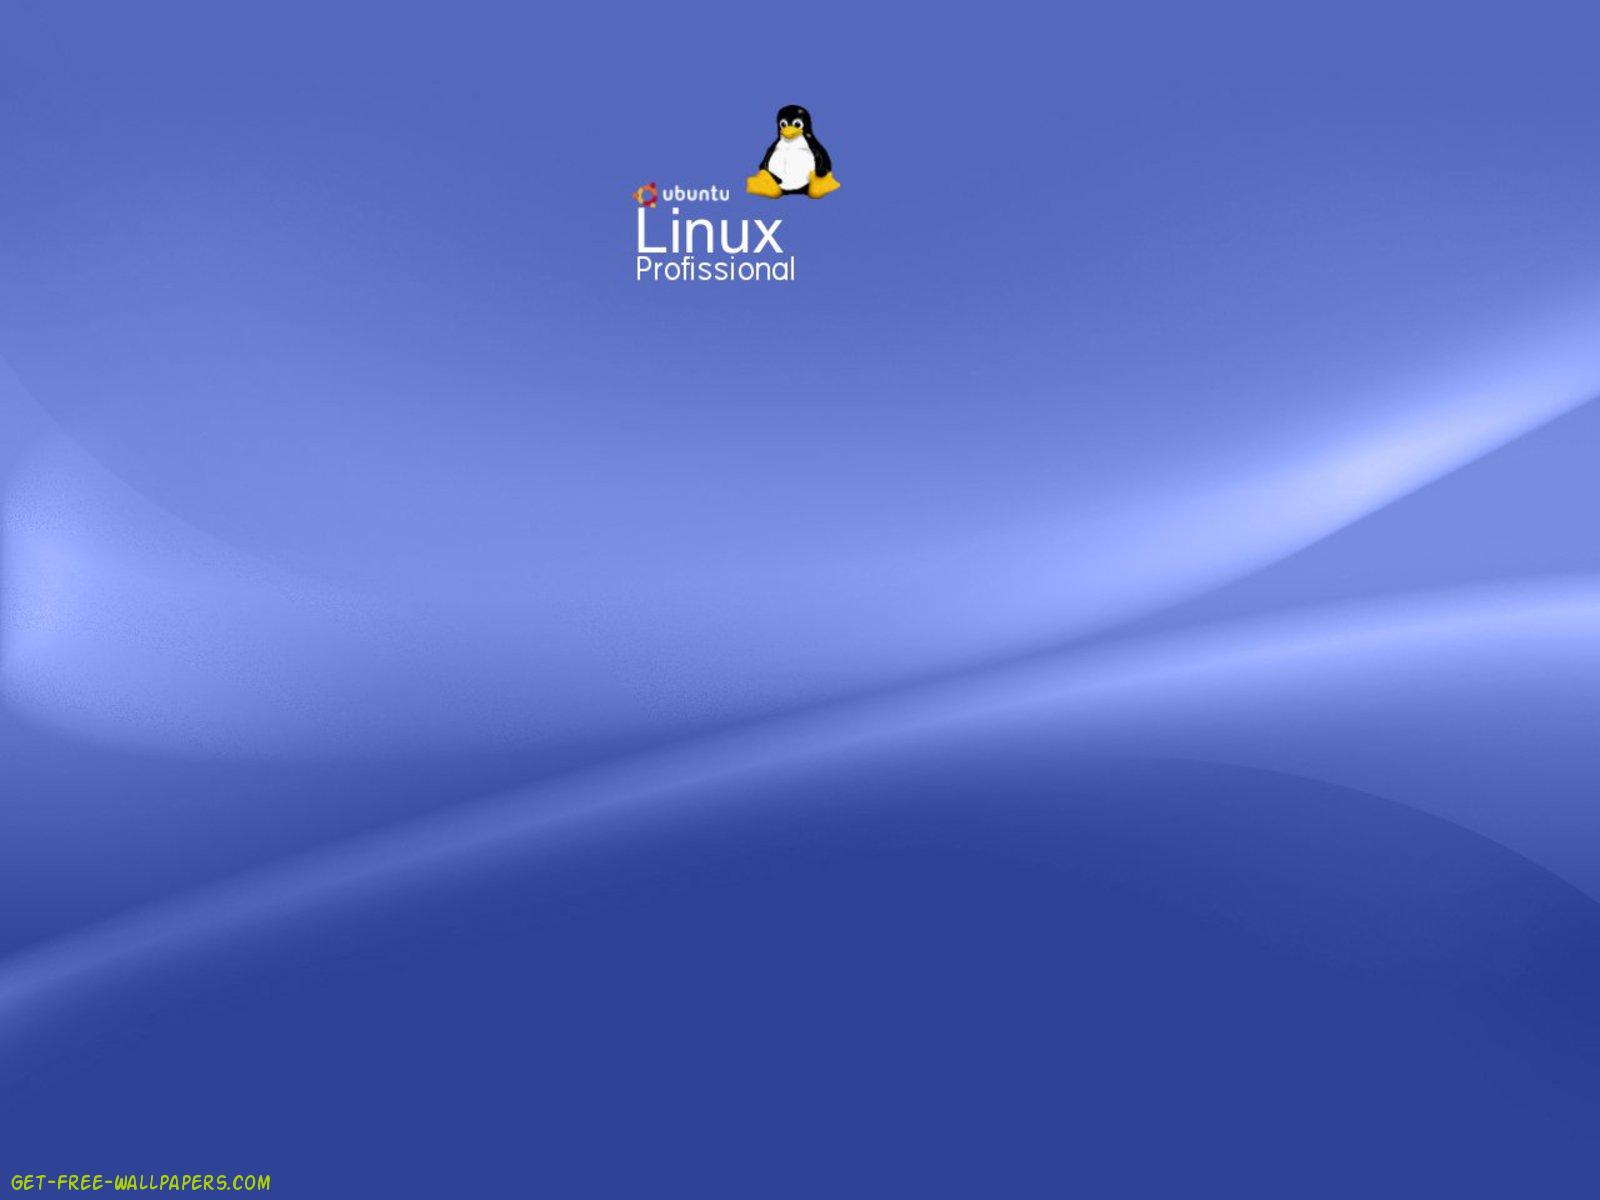 Home Linux Professionals Gallery Also Try